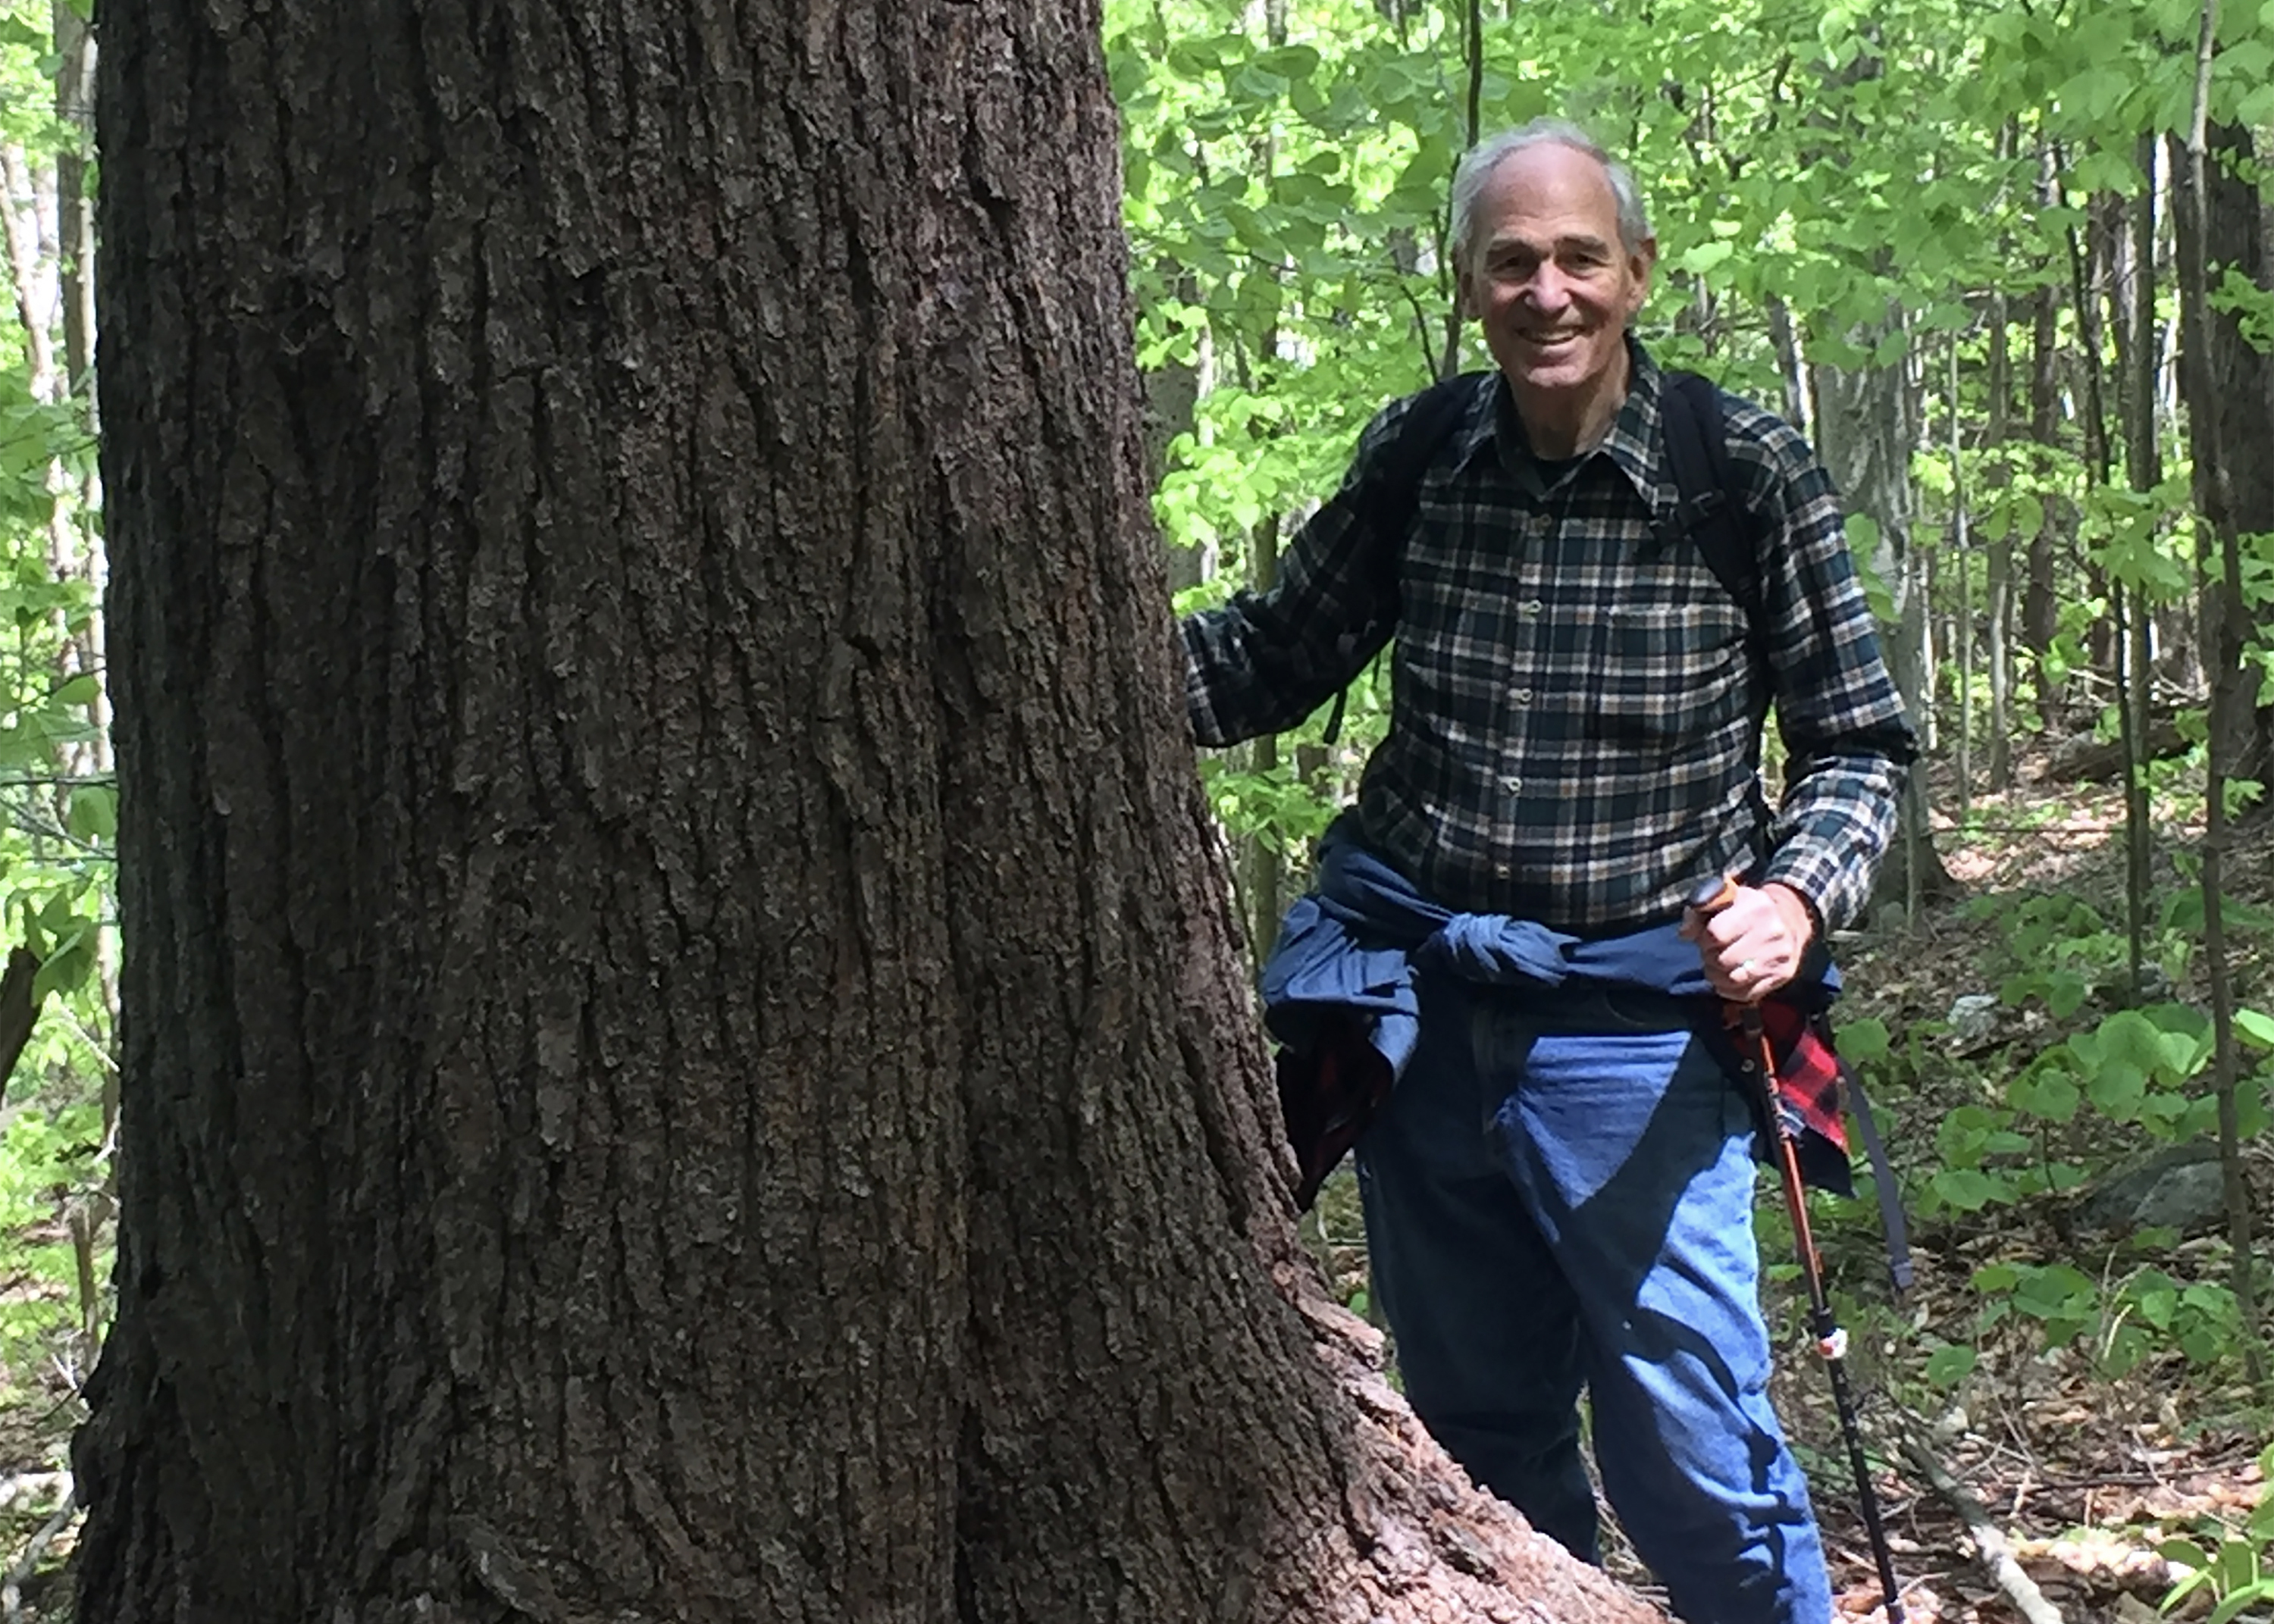 In hiking clothes, Bill Moomaw stands beside a tree trunk in the forest